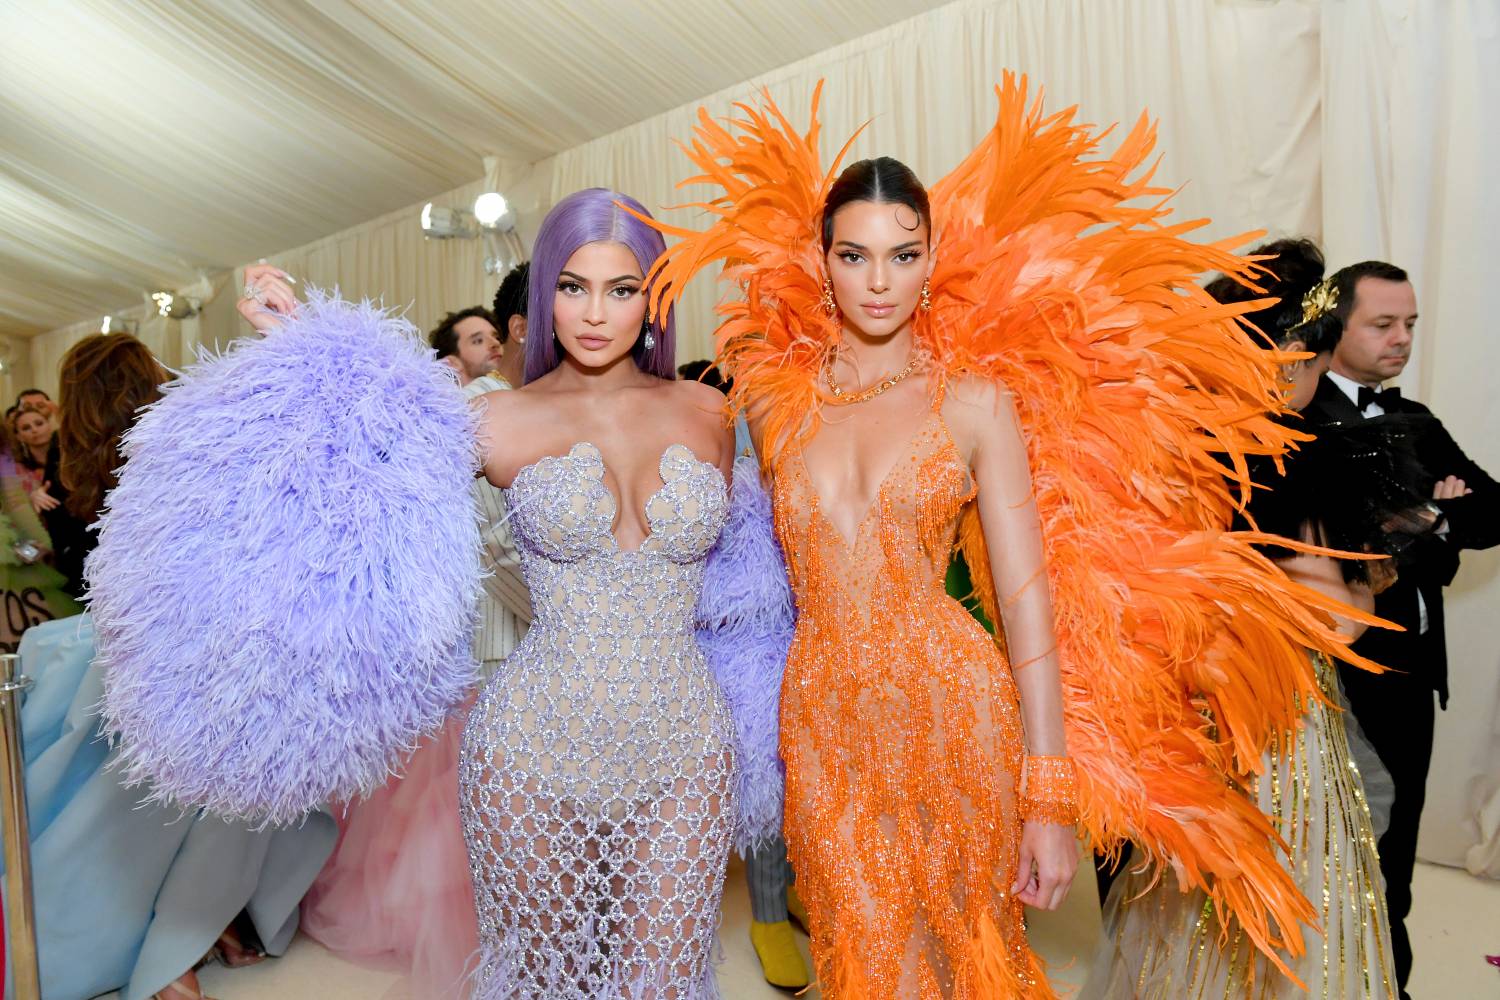 Kylie Jenner and Kendall Jenner attend The 2019 Met Gala Celebrating Camp: Notes on Fashion at Metropolitan Museum of Art on May 06, 2019 in New York City.